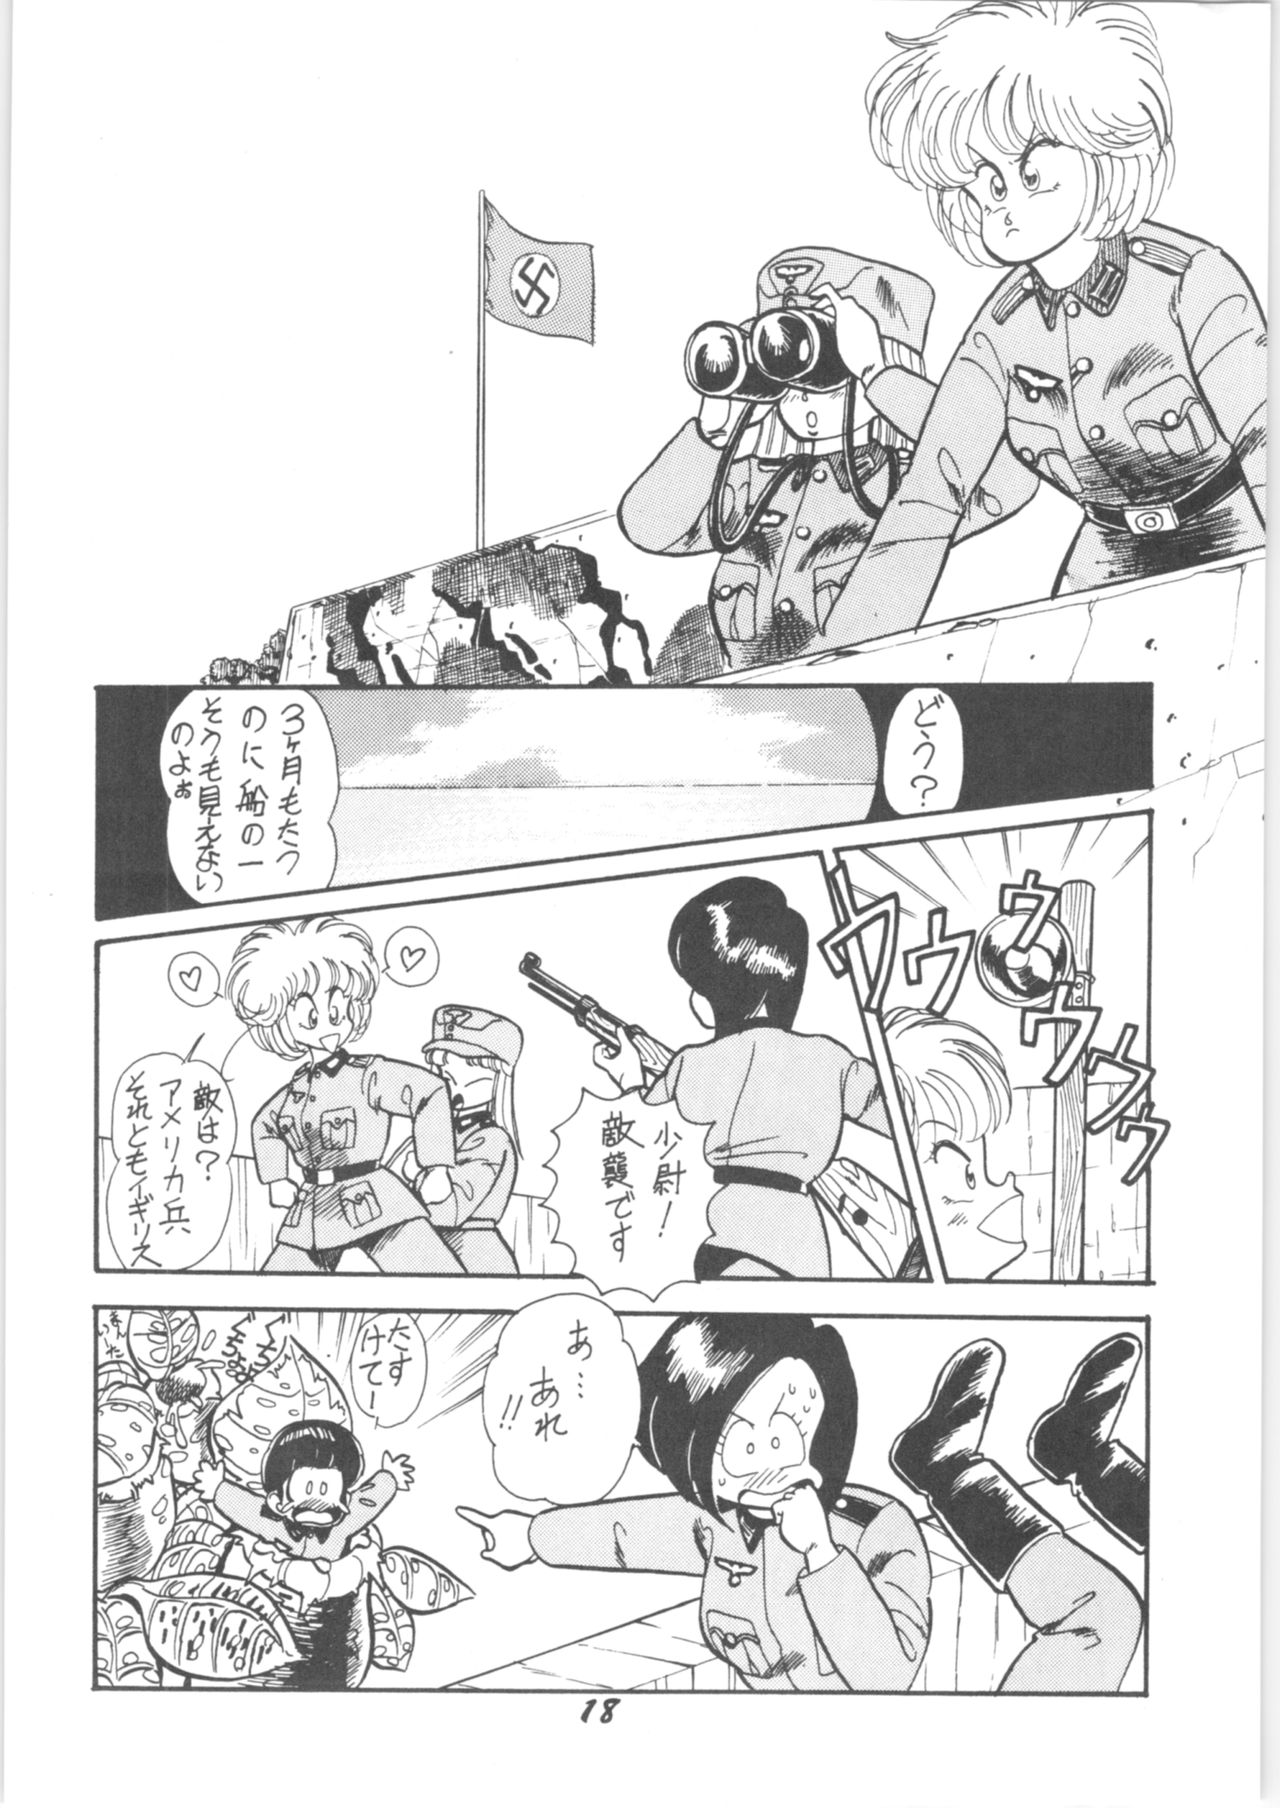 (C36) [Signal Group (Various)] Sieg Heil (Various) page 17 full